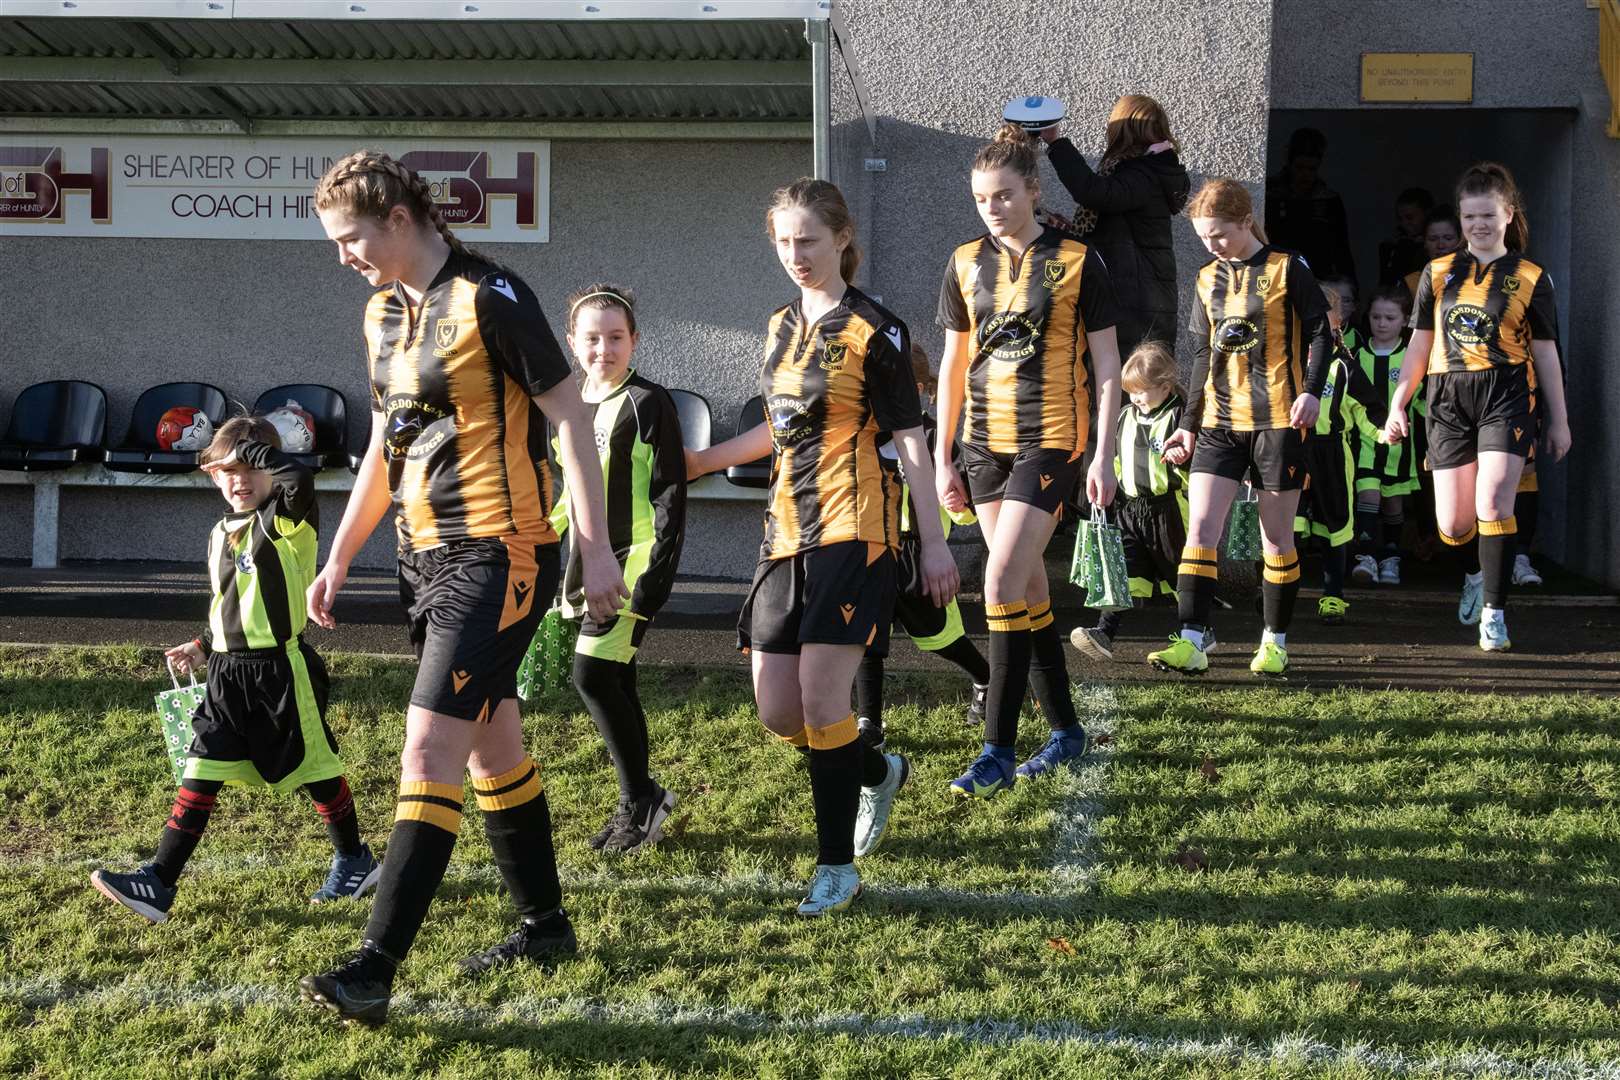 Huntly Women's team walking out with their mascots ahead of their first match. ..Huntly Women's F.C. v Inverurie Locos Works F.C Ladies at Christie Park...Picture: Beth Taylor.